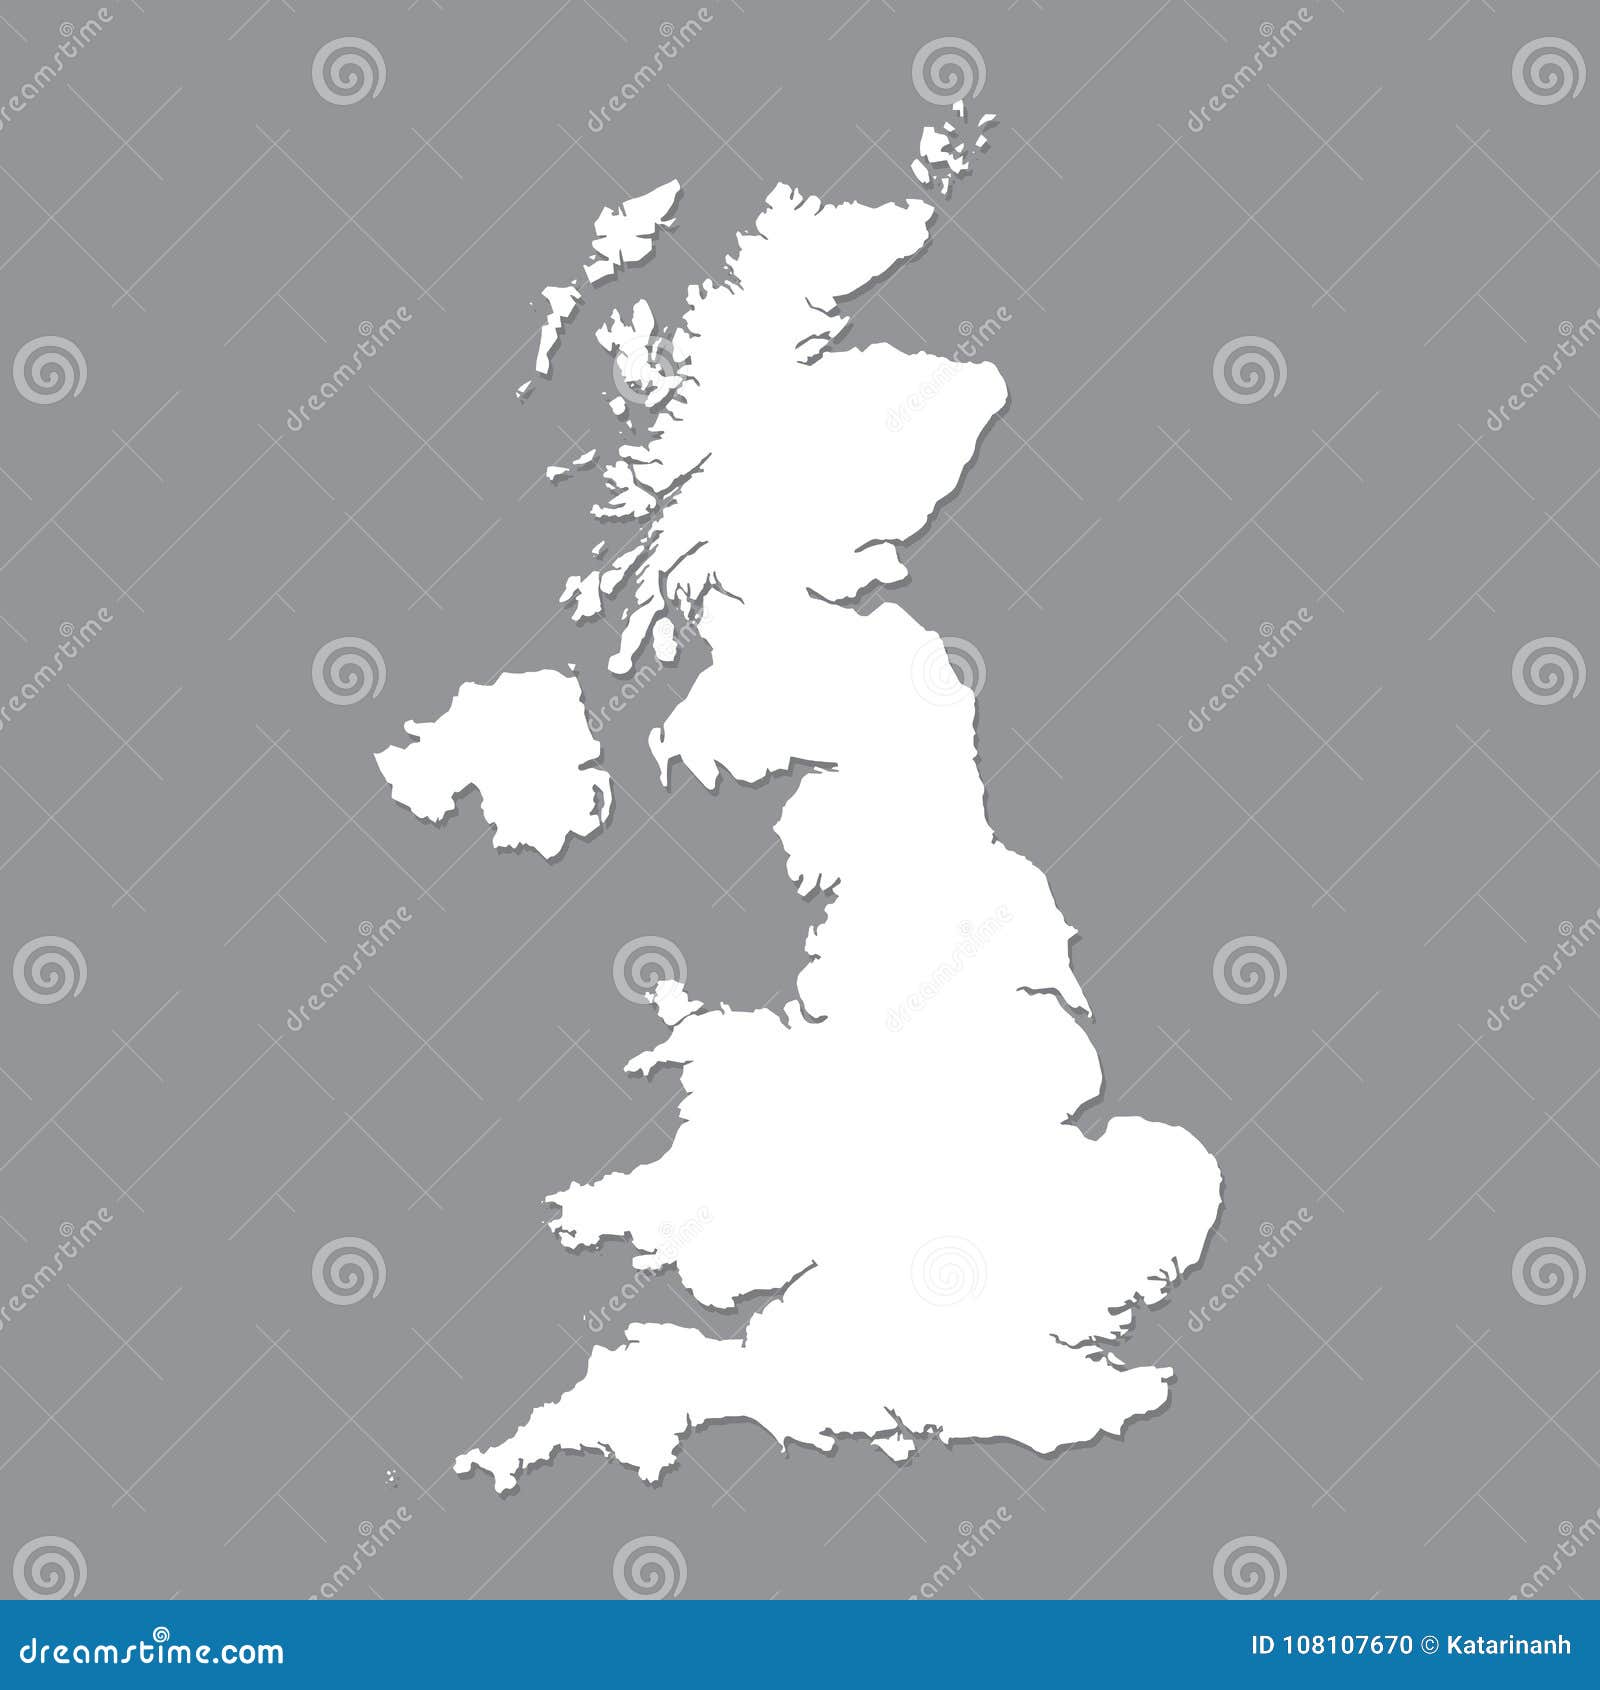 map of great britain. united kingdom of great britain and northern ireland simple map. uk icon.